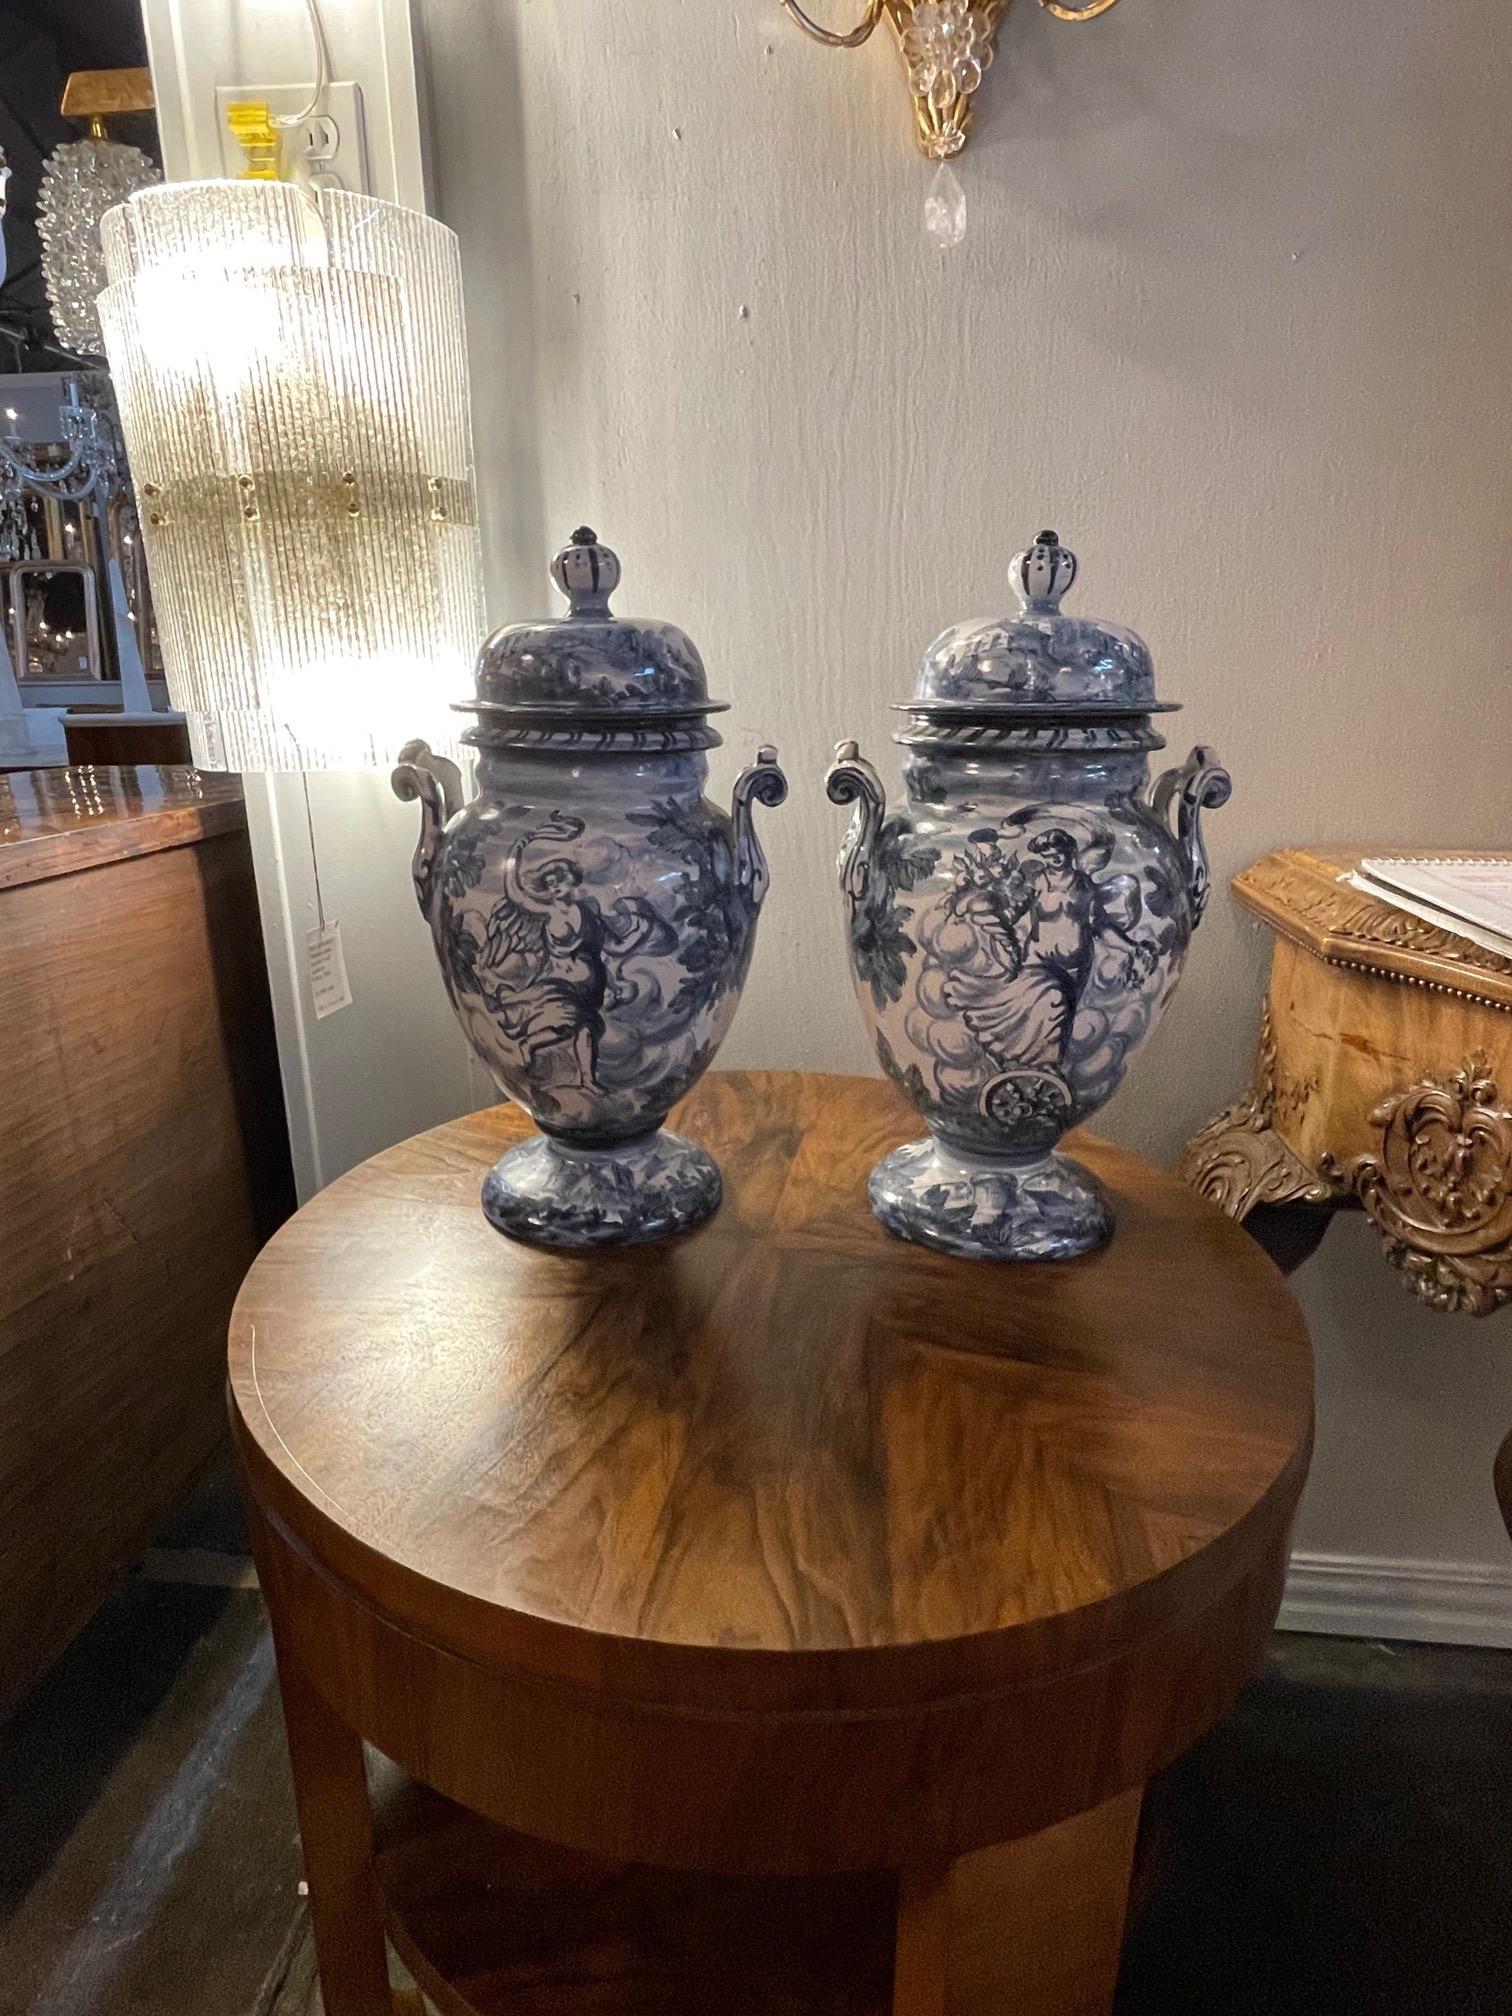 Beautiful pair of blue and white Faience glazed lidded urns. Lovely landscape and floral images along a lovely lady. Fabulous!